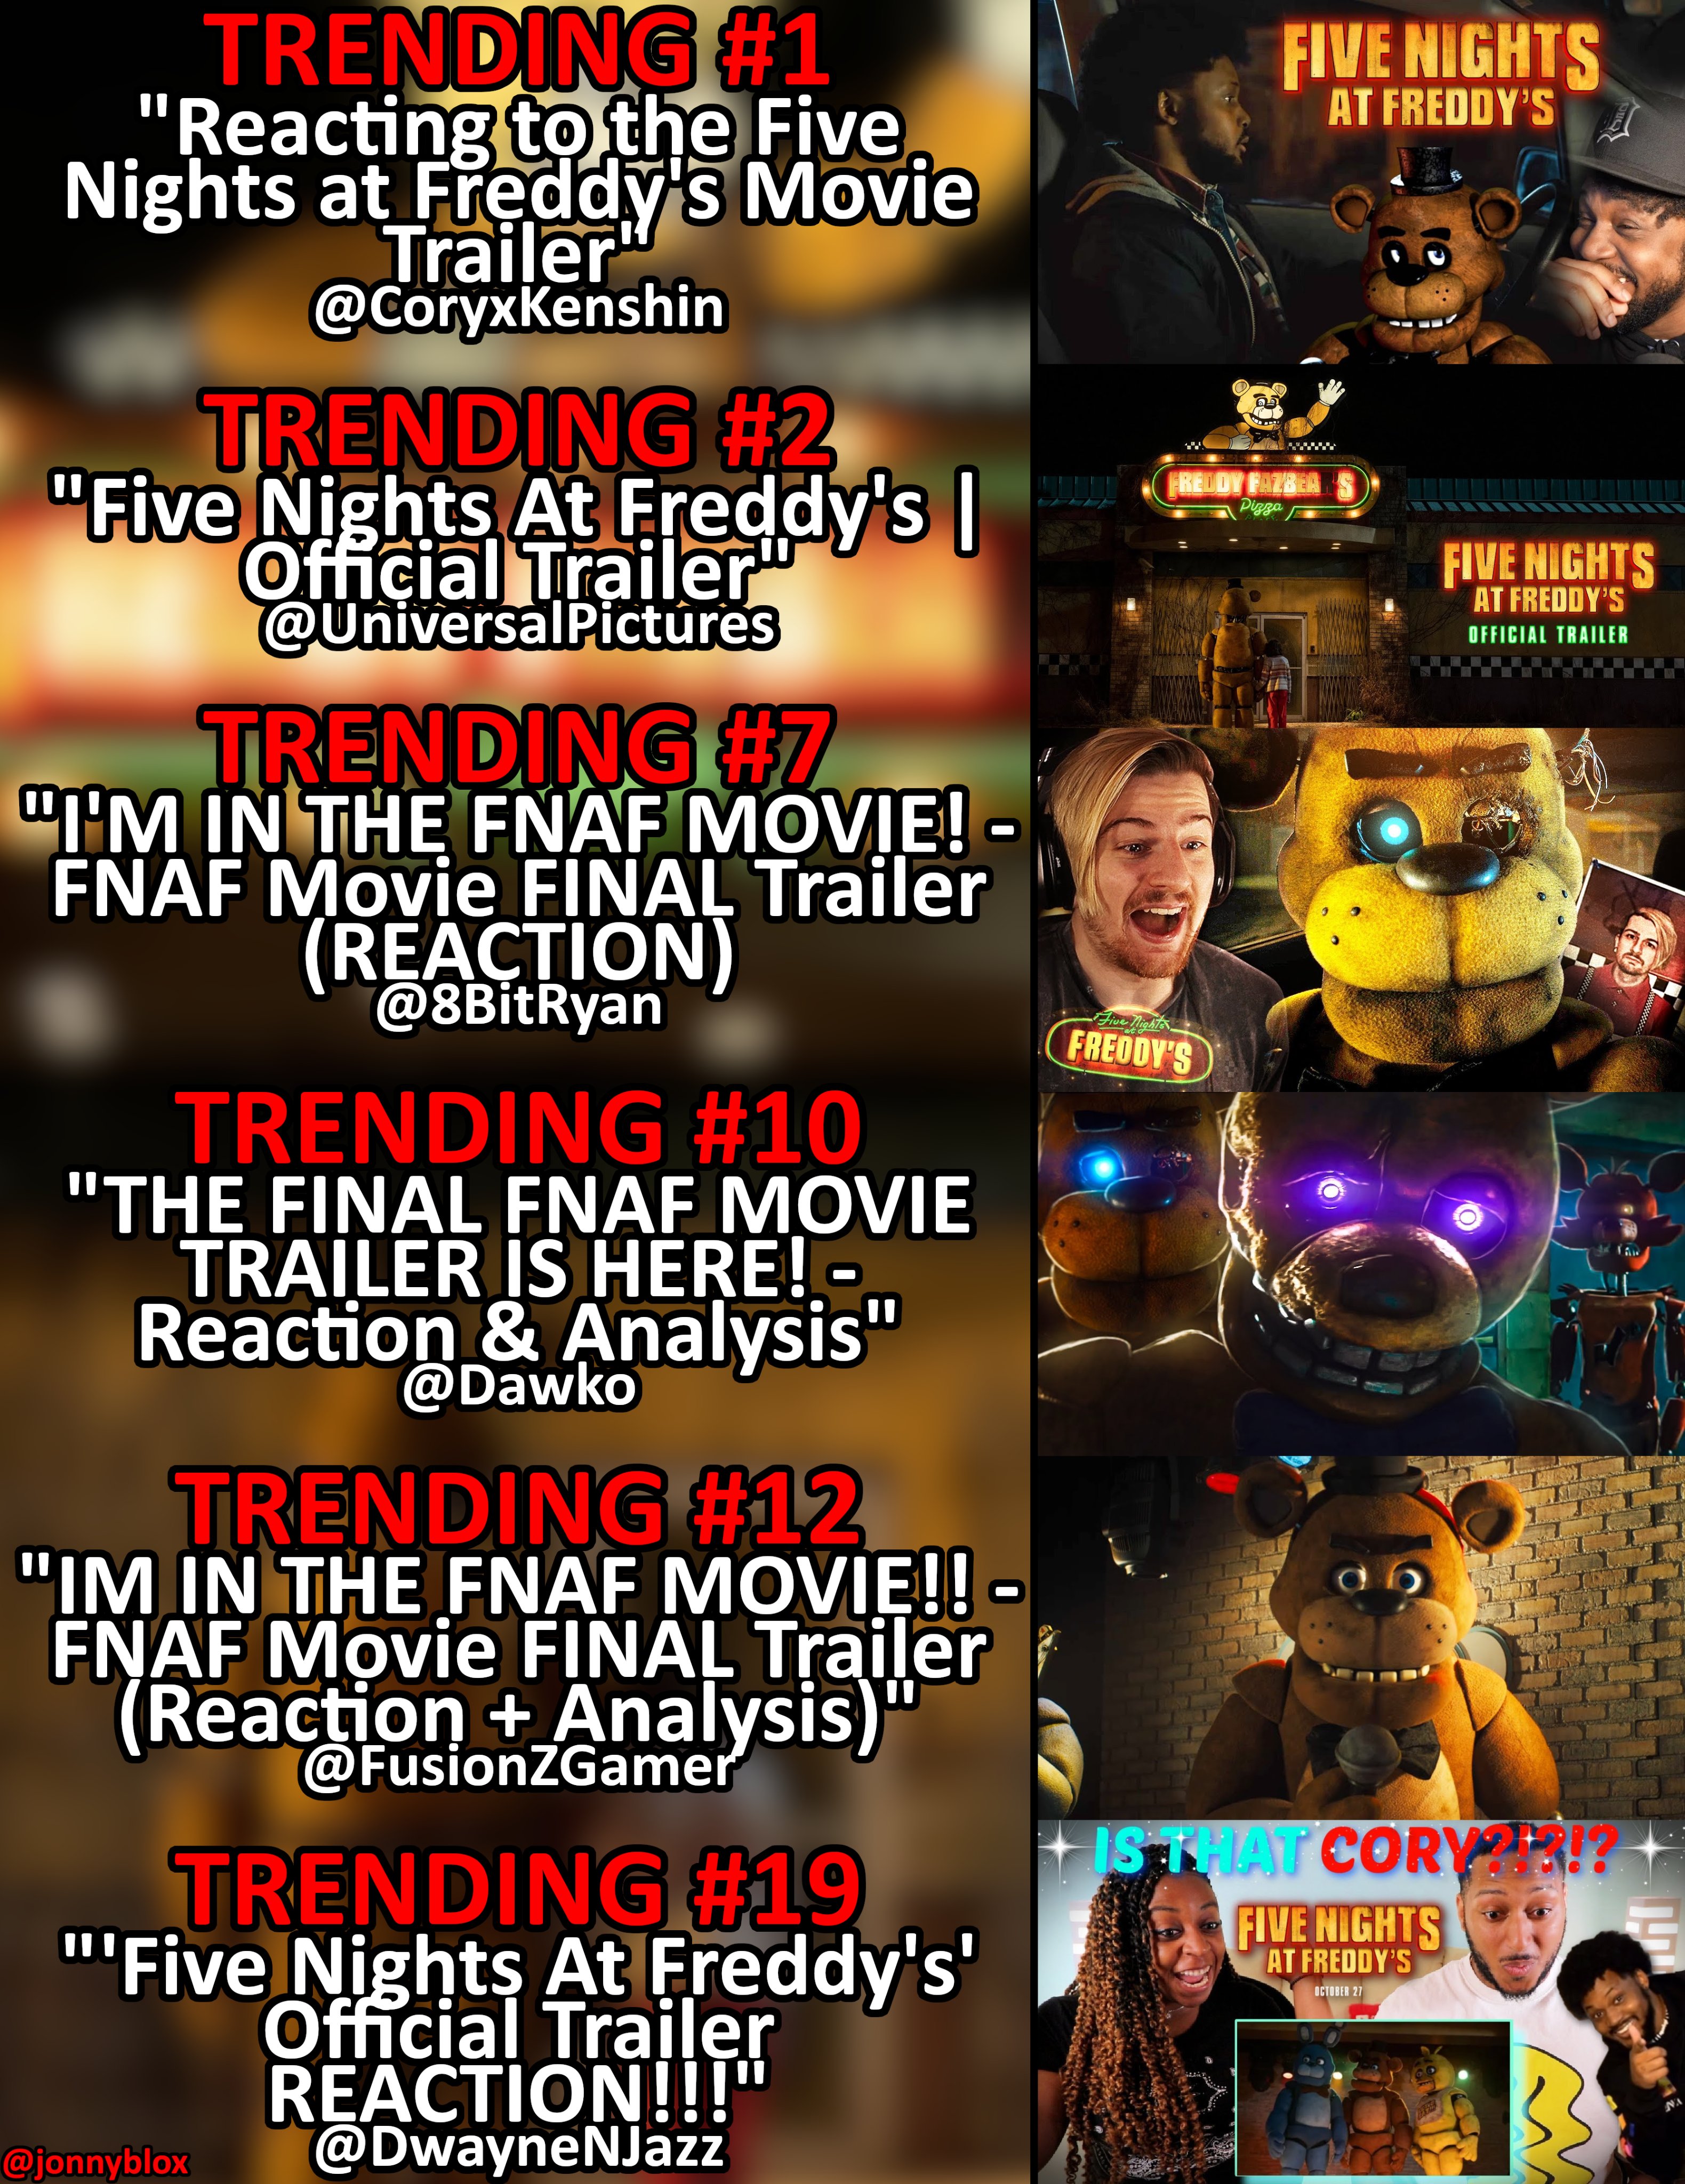 MOVIES: Five Nights at Freddy's - Trailers + Posters